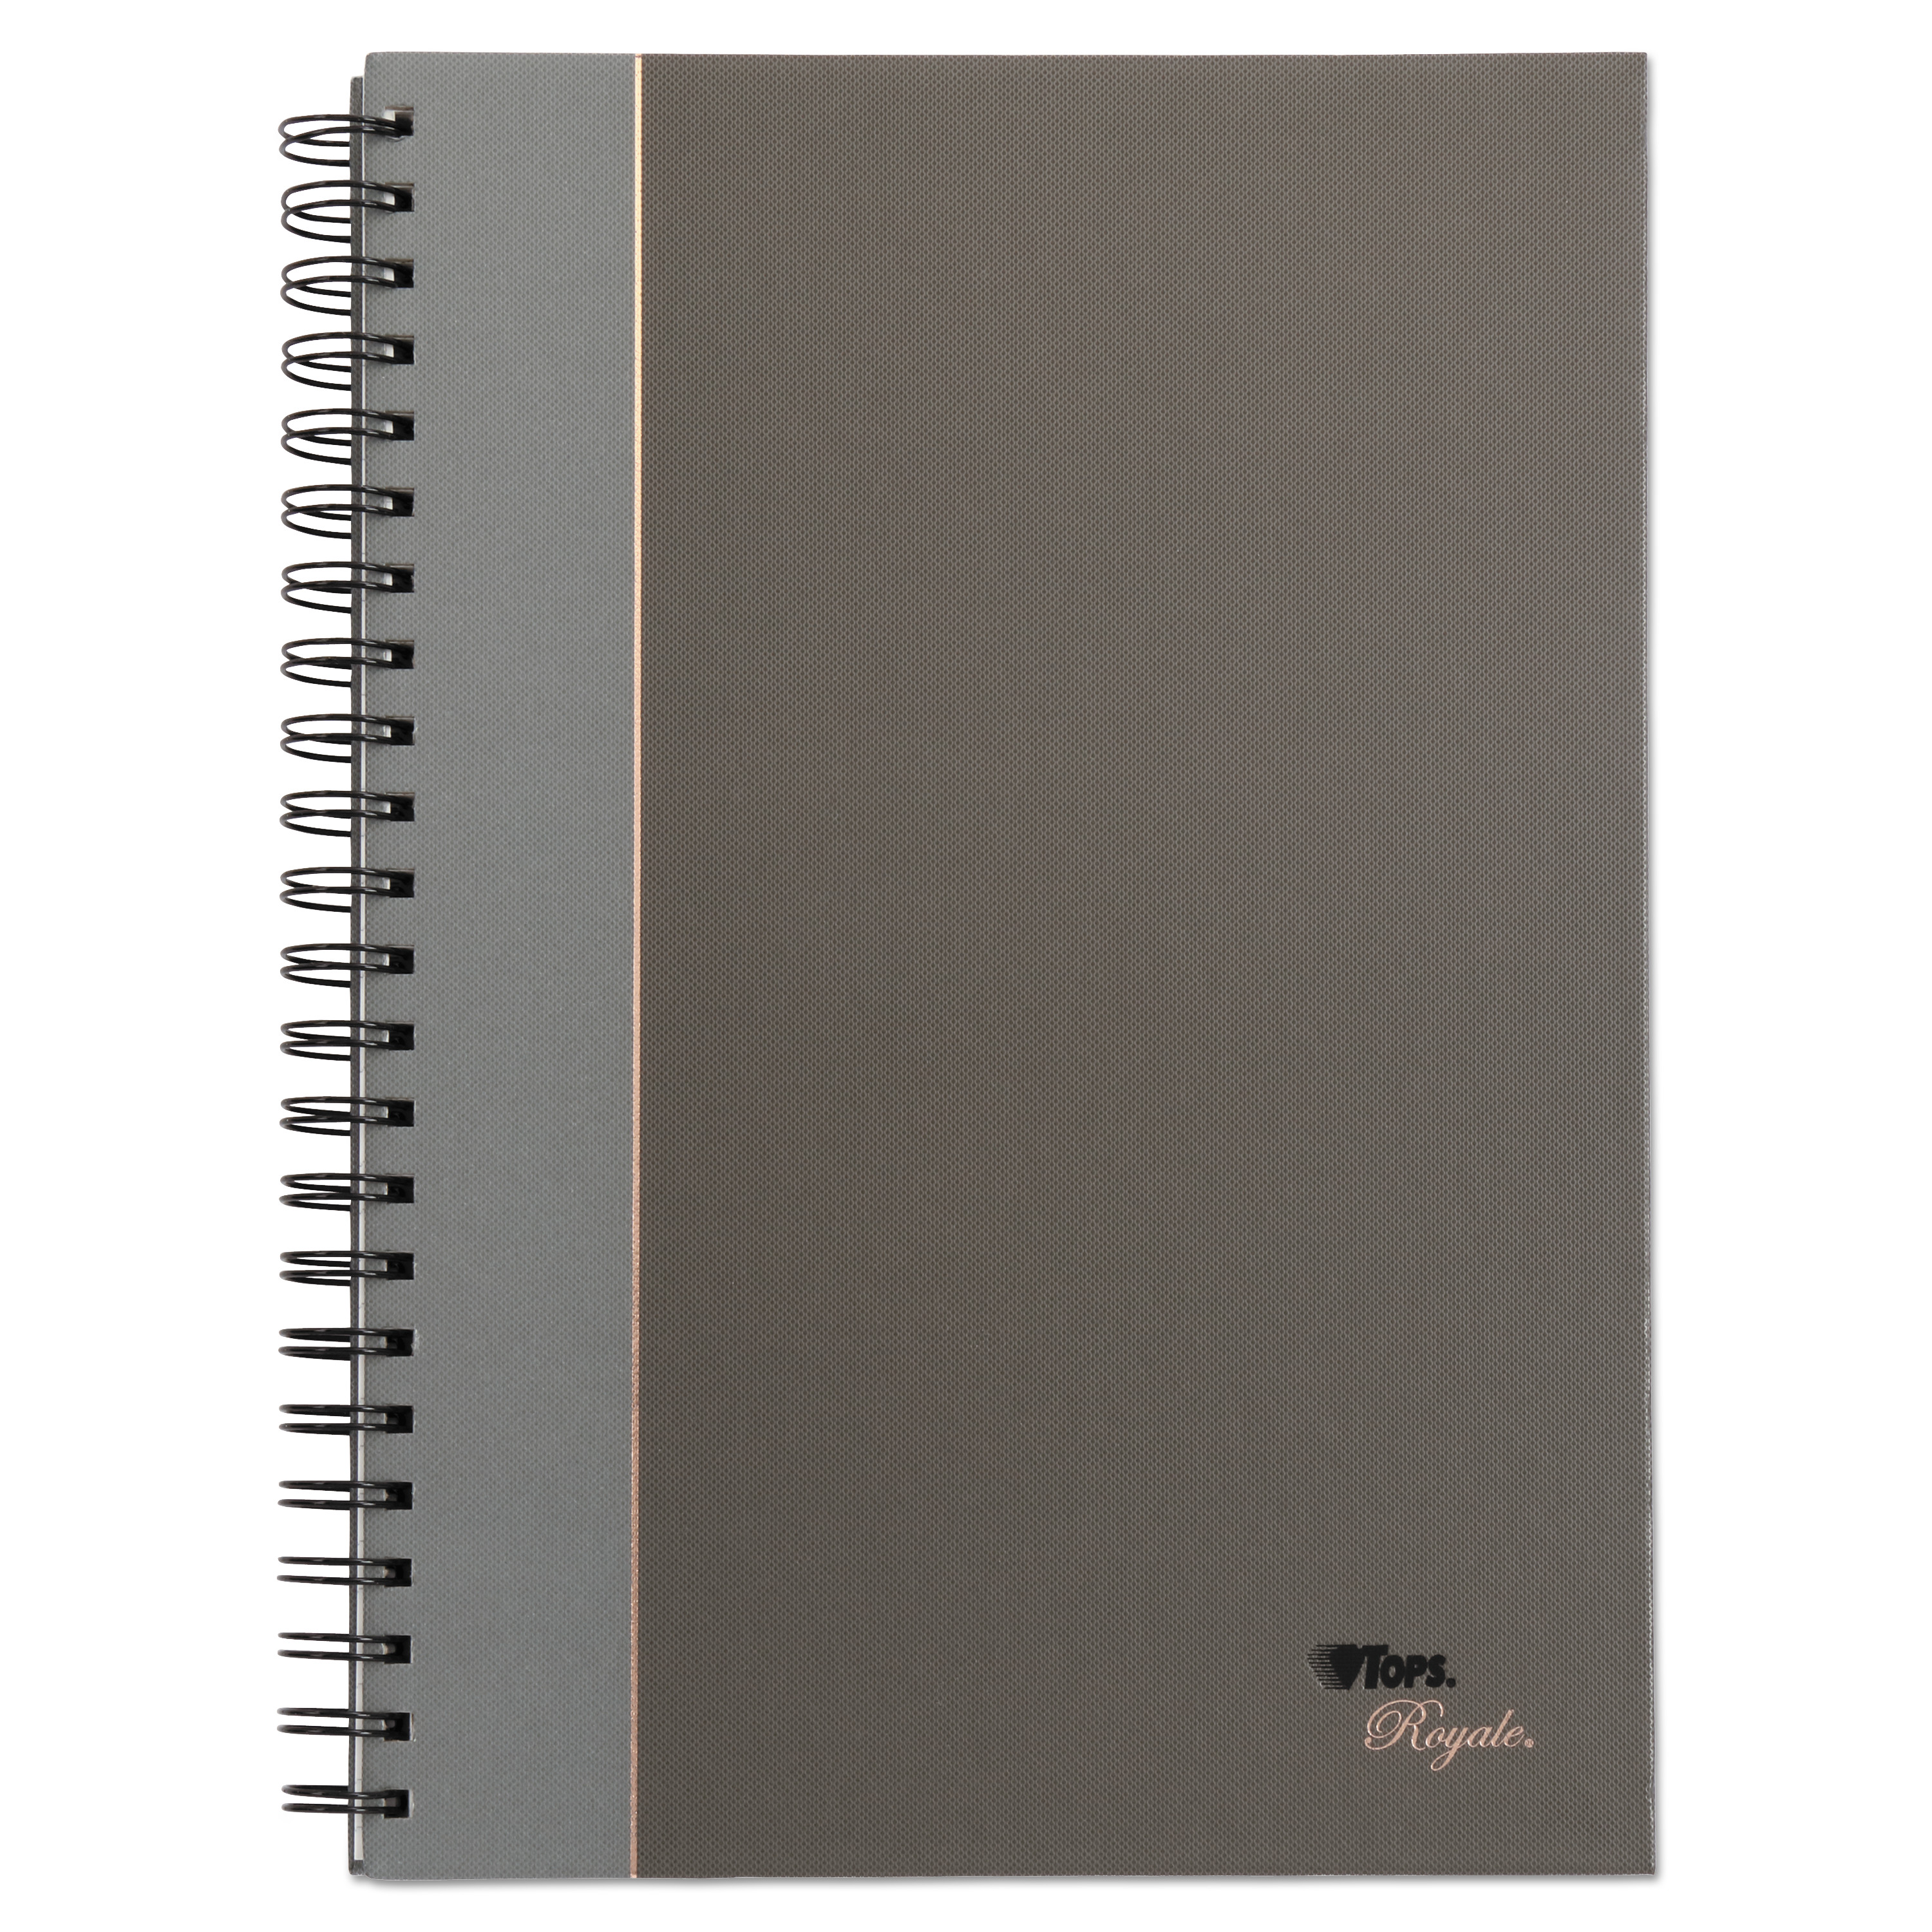  TOPS 25332 Royale Wirebound Business Notebook, College, Black/Gray, 11.75 x 8.25, 96 Sheets (TOP25332) 